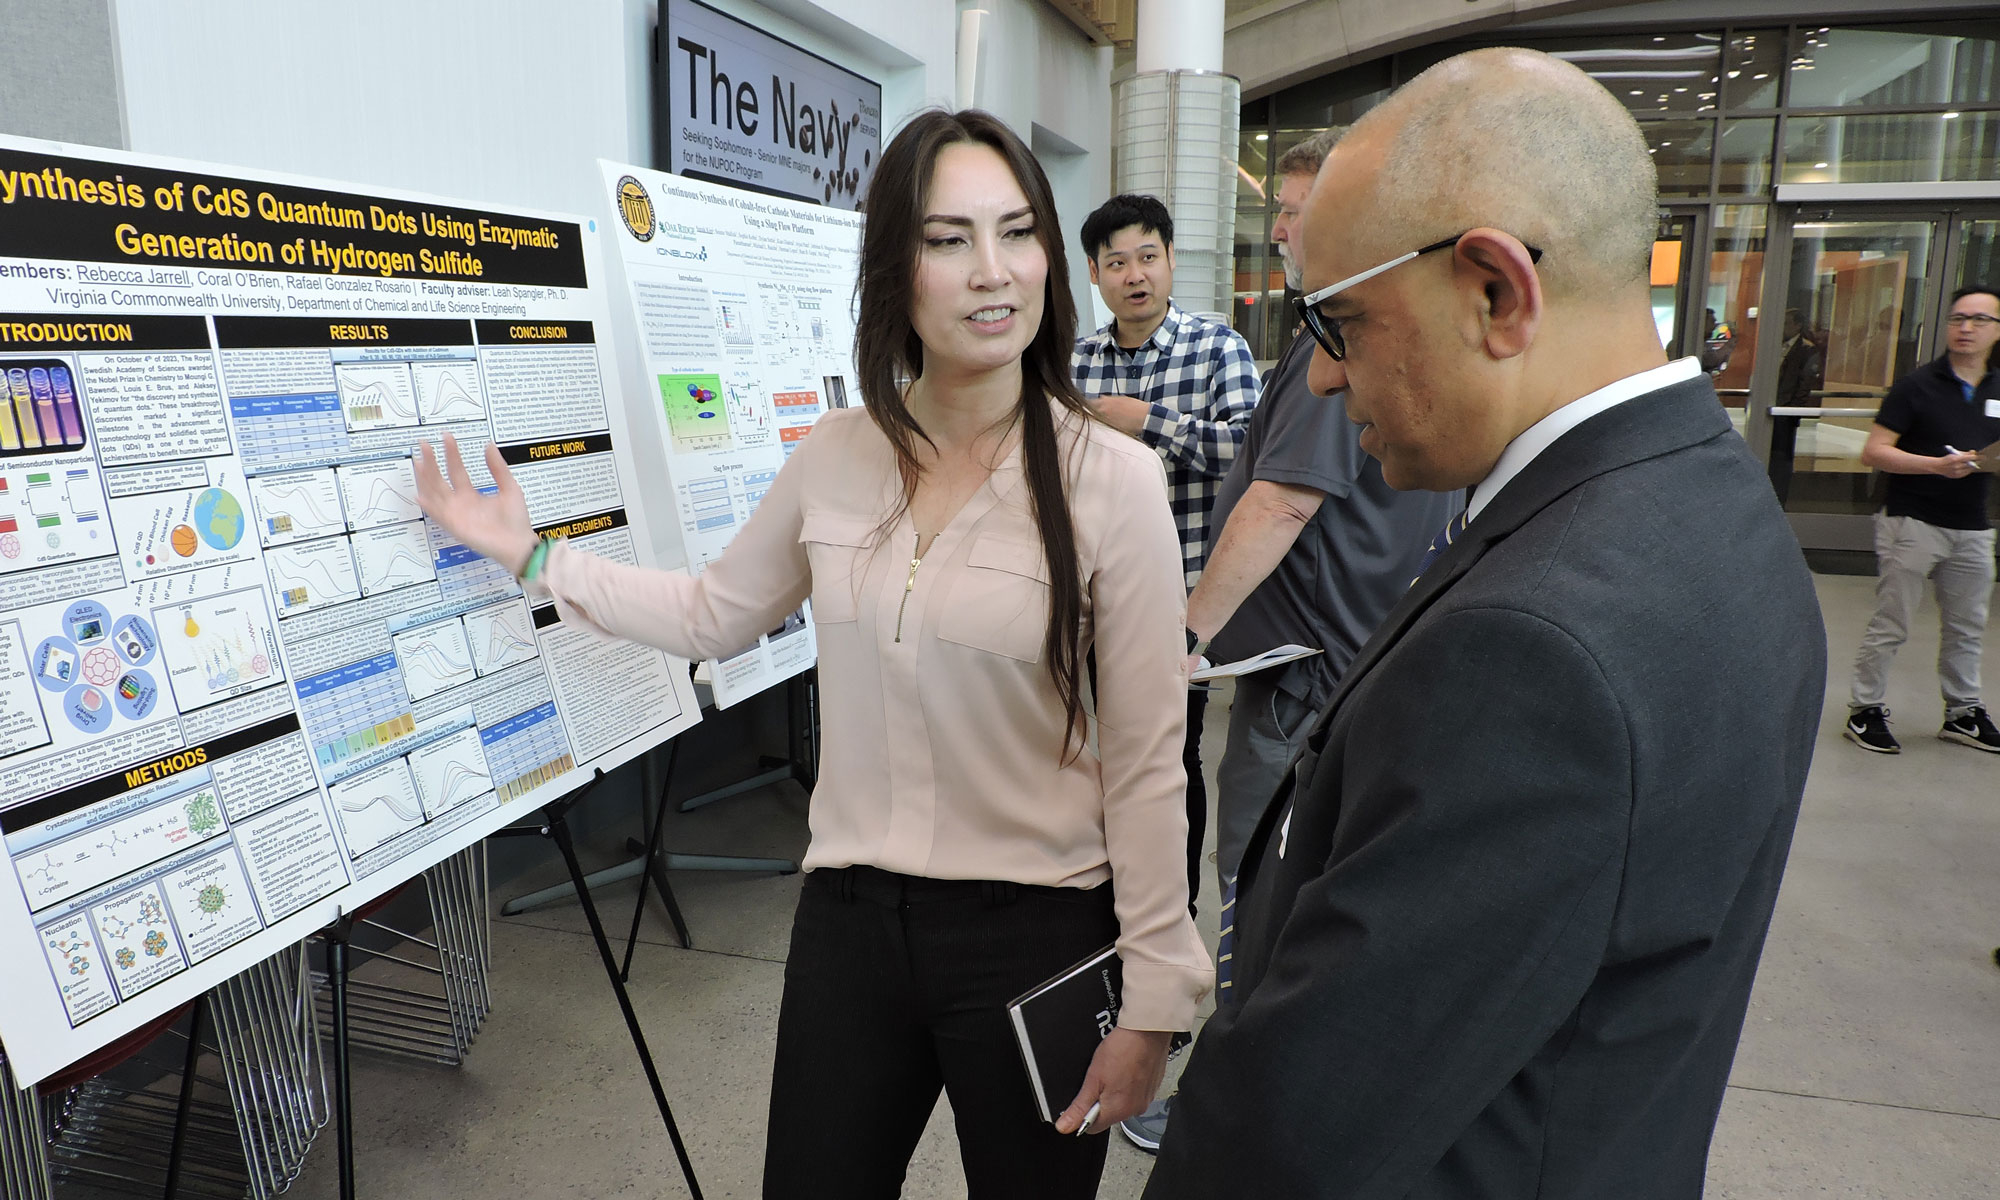 Rebecca Jarrell, doctoral student in the Department of Chemical and Life Science Engineering, presenting her poster at the 27th Annual Graduate Research Symposium.